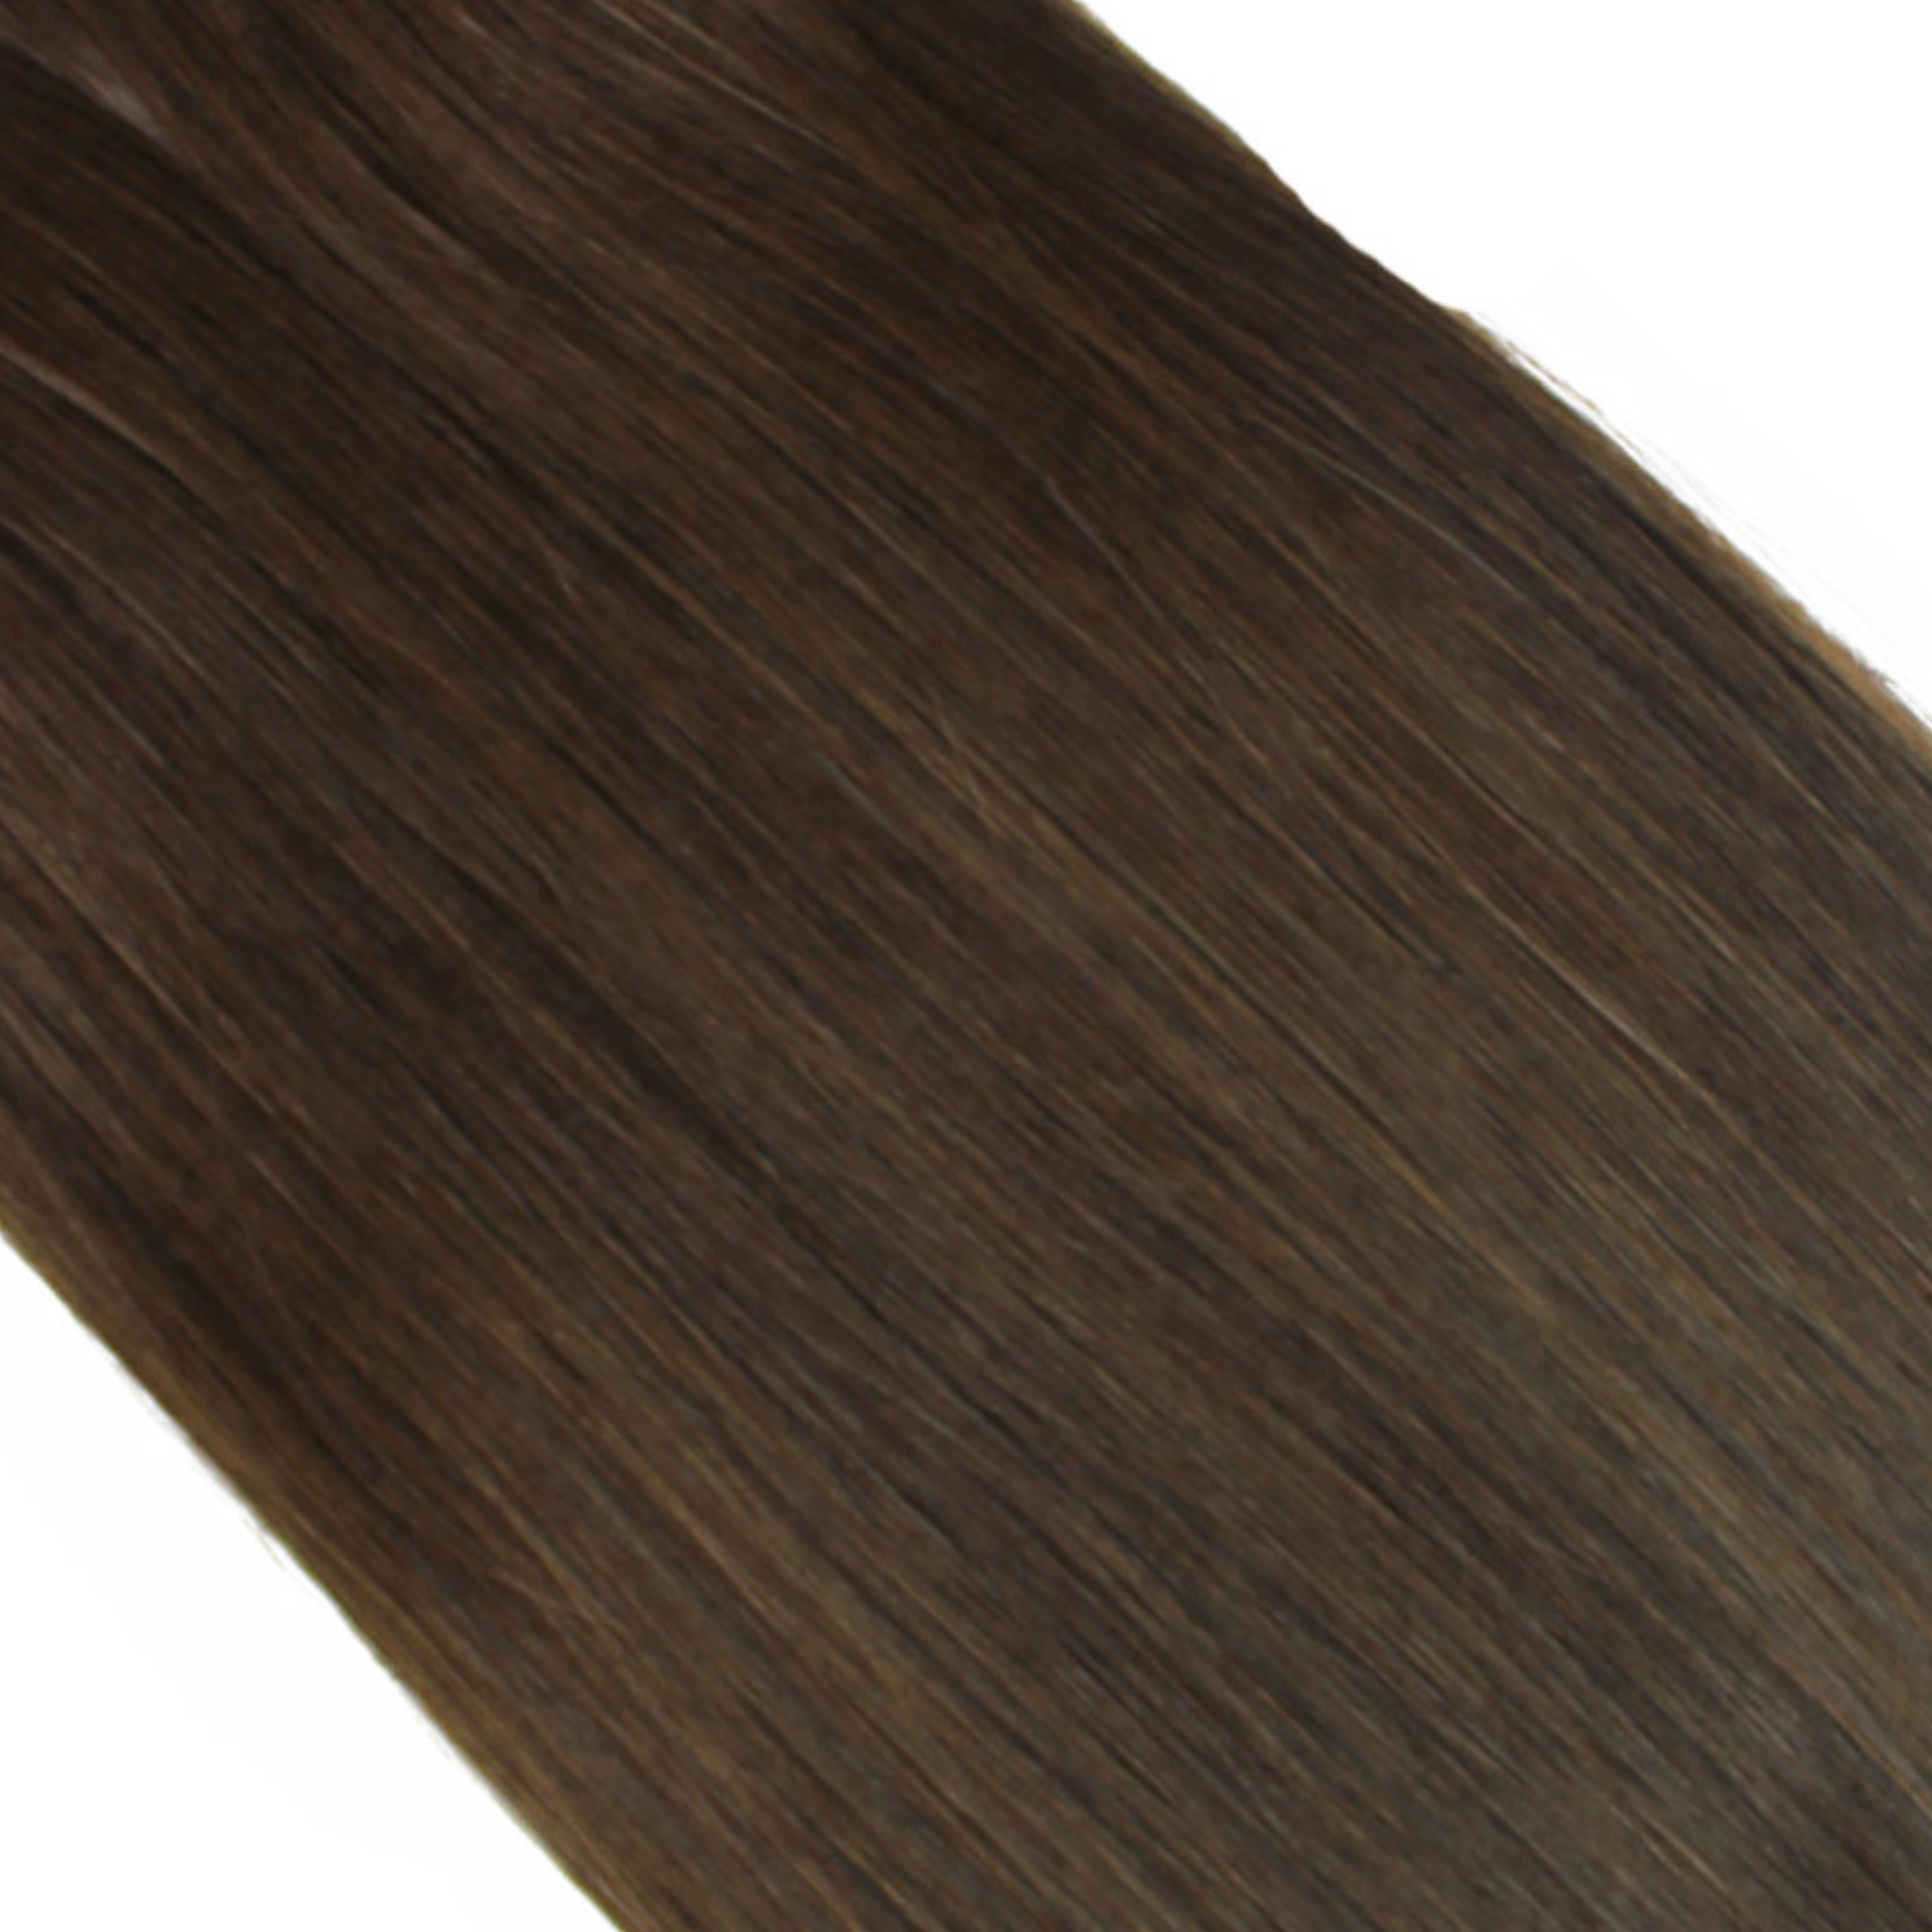 "hair rehab london 20" length 180 grams weight luxe clip-in hair extensions shade titled paparazzi perfect"